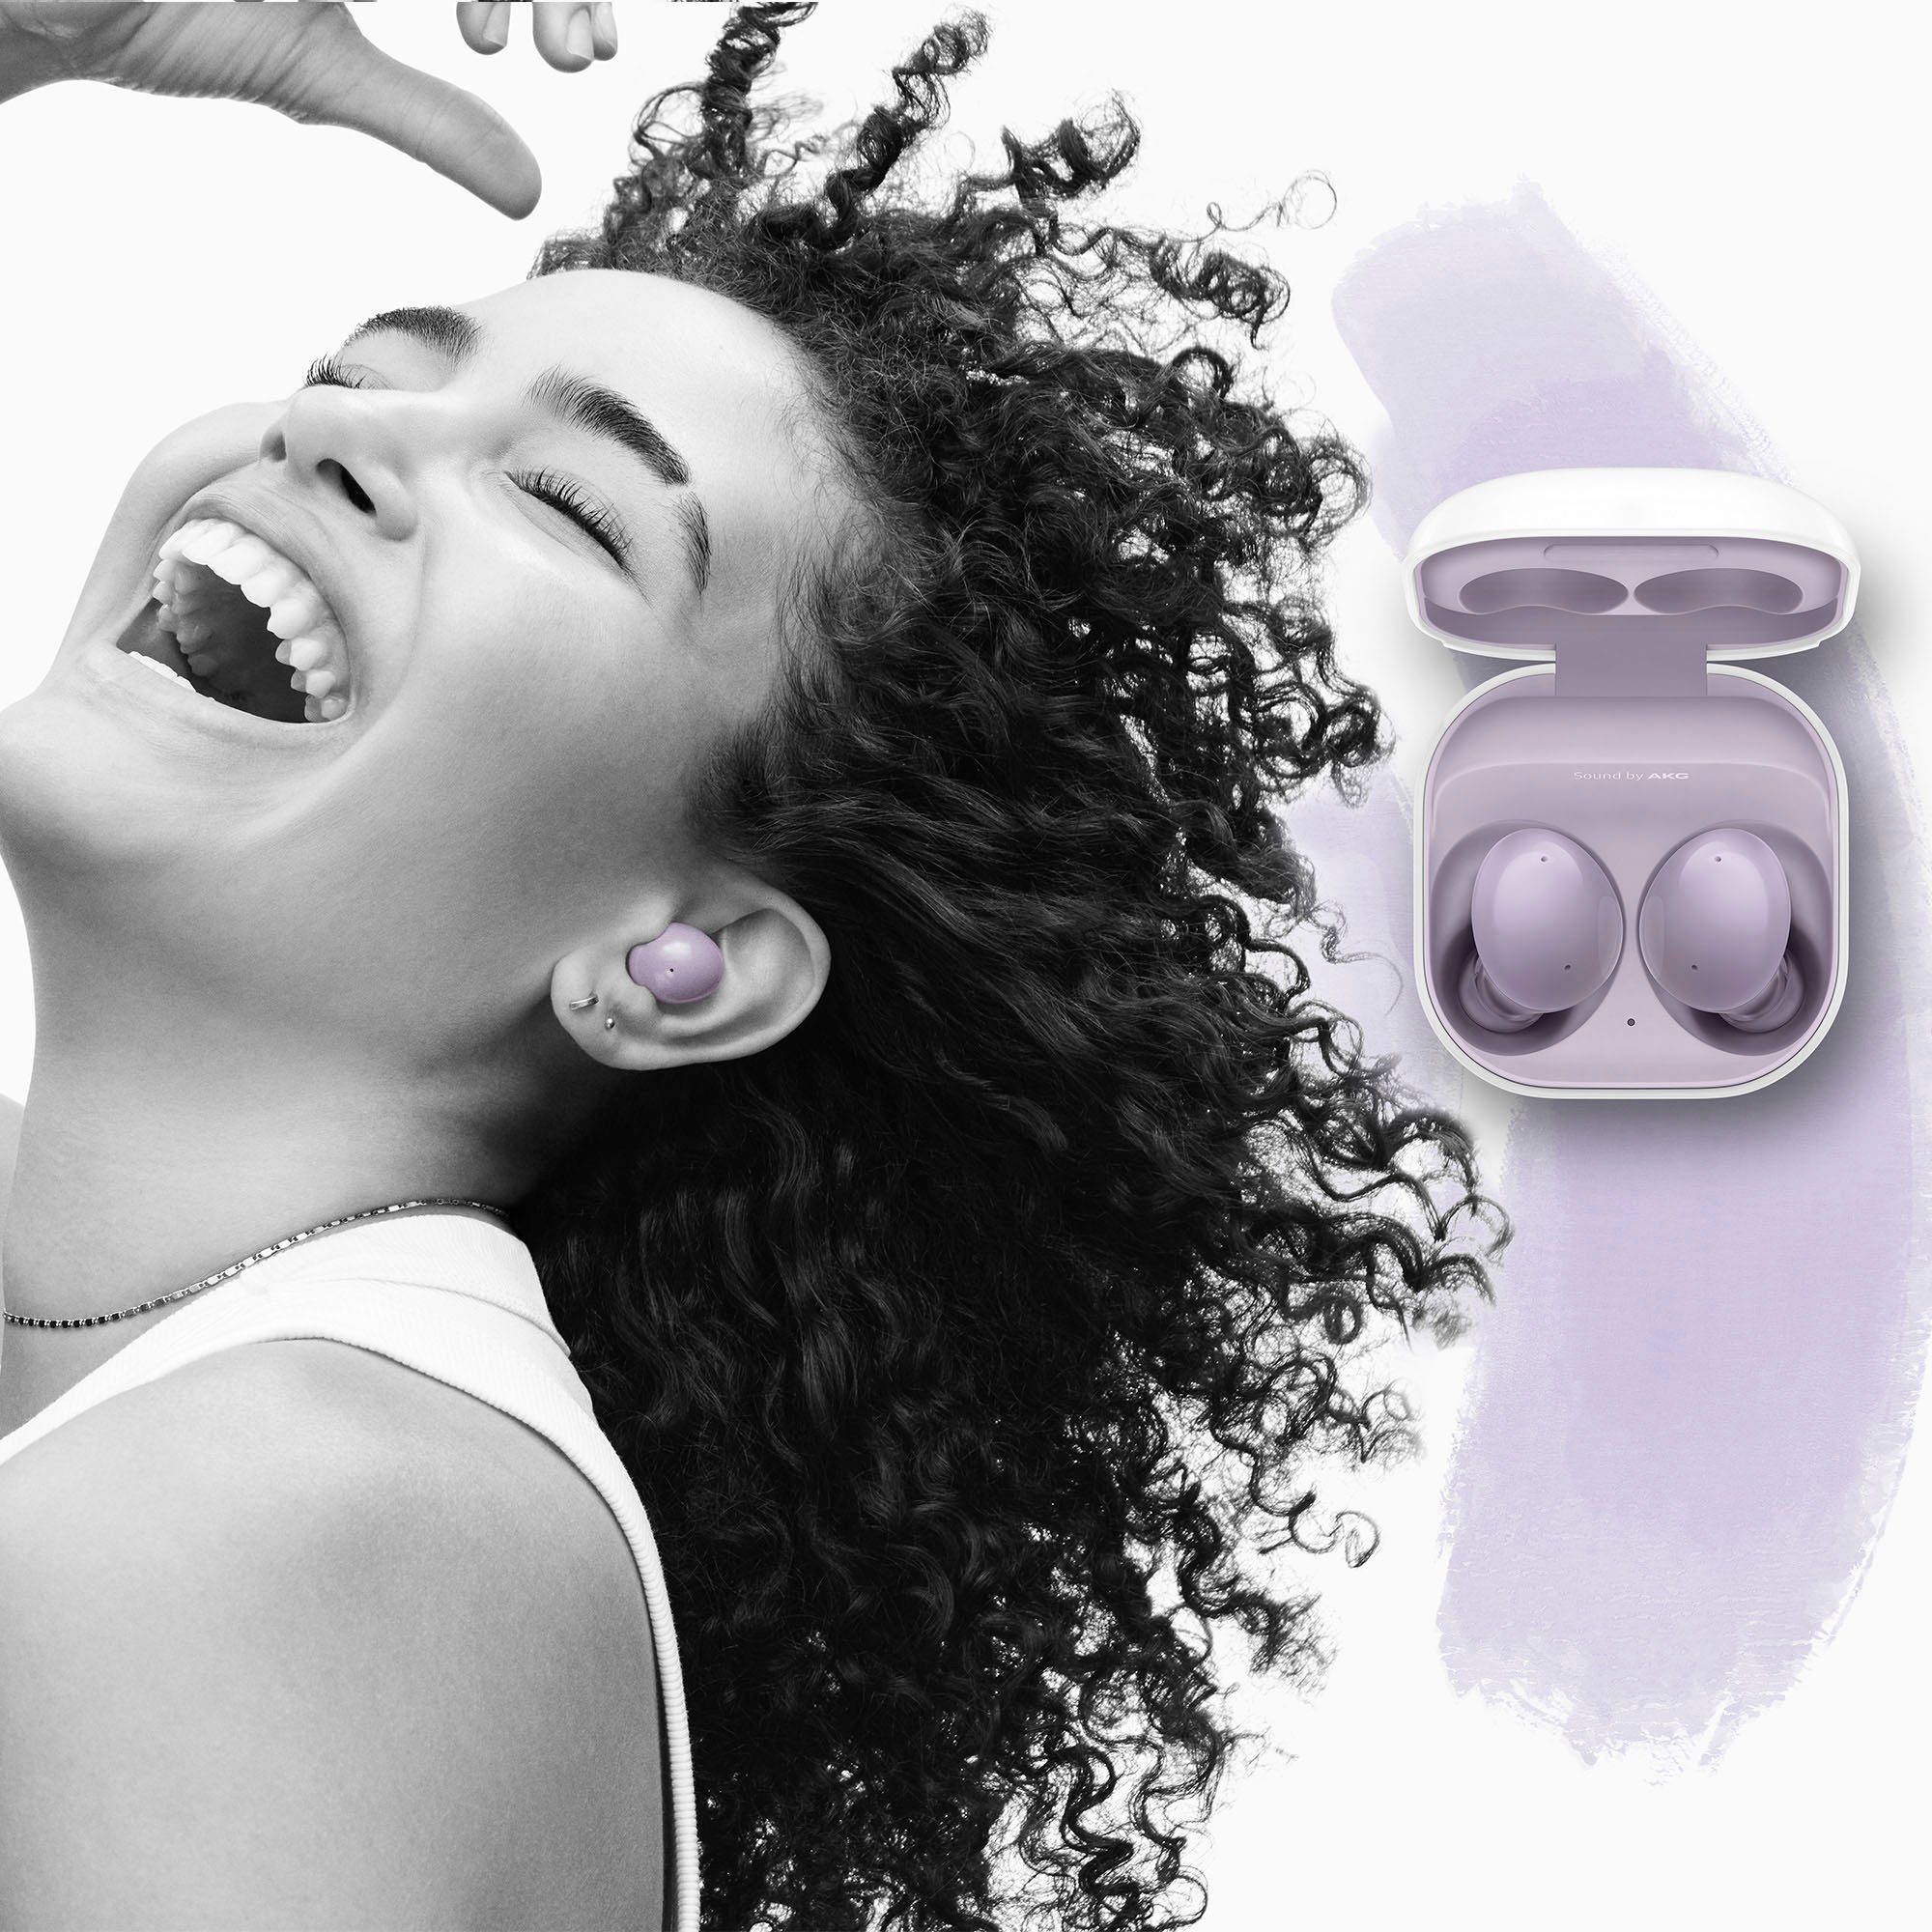 Samsung Galaxy Buds2 Olive Bluetooth) In-Ear-Kopfhörer (Active Cancelling Noise (ANC)